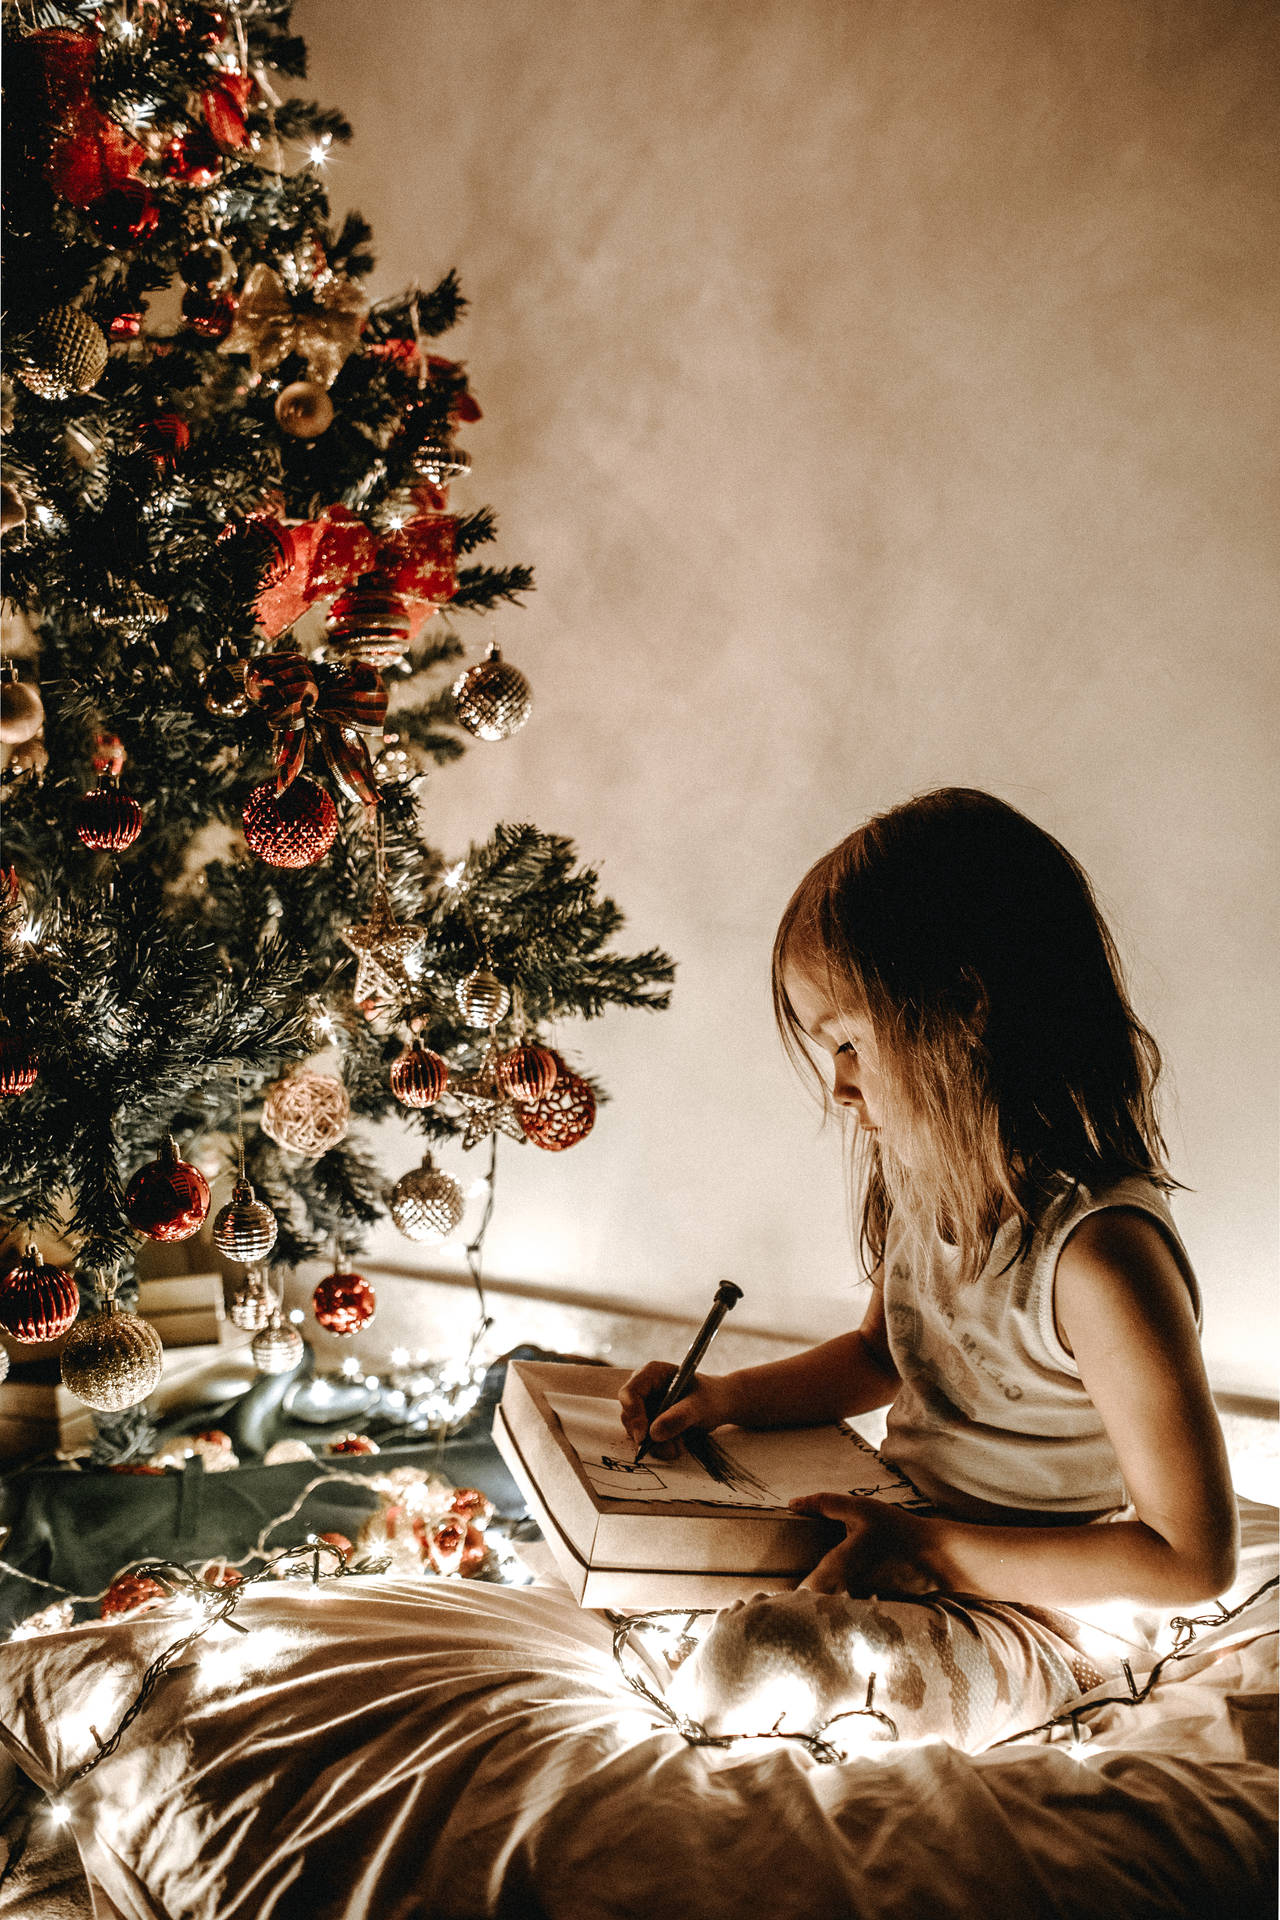 An adorable little girl sits in the middle of a festive array of twinkling lights and pine branches just in time for Christmas. Wallpaper